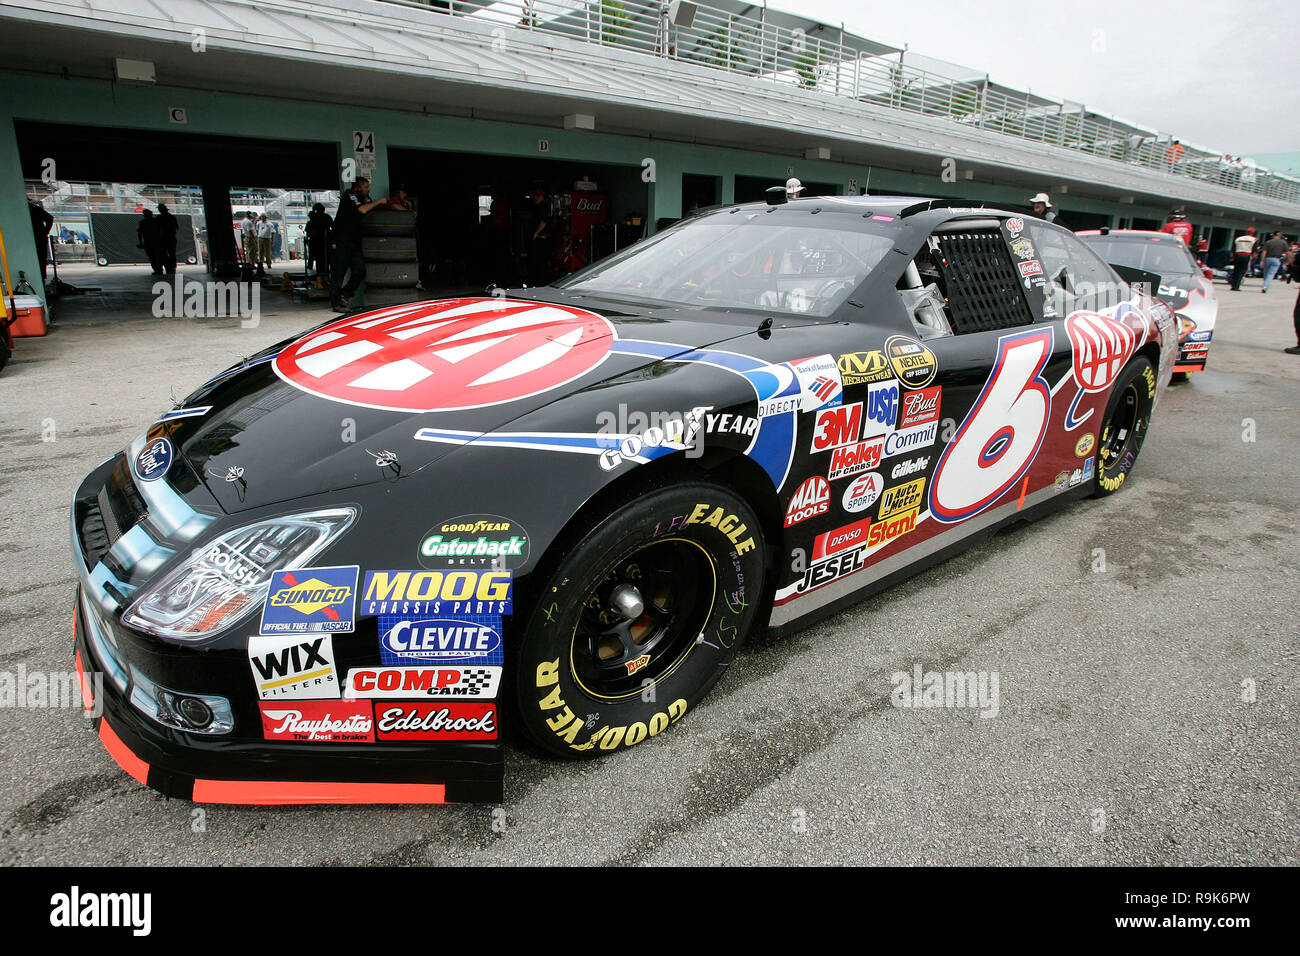 mark-martin-drives-through-the-garage-area-for-the-morning-nextel-cup-practice-at-homestead-miami-speedway-in-homestead-florida-on-november-17-2006-R9K6PW.jpg